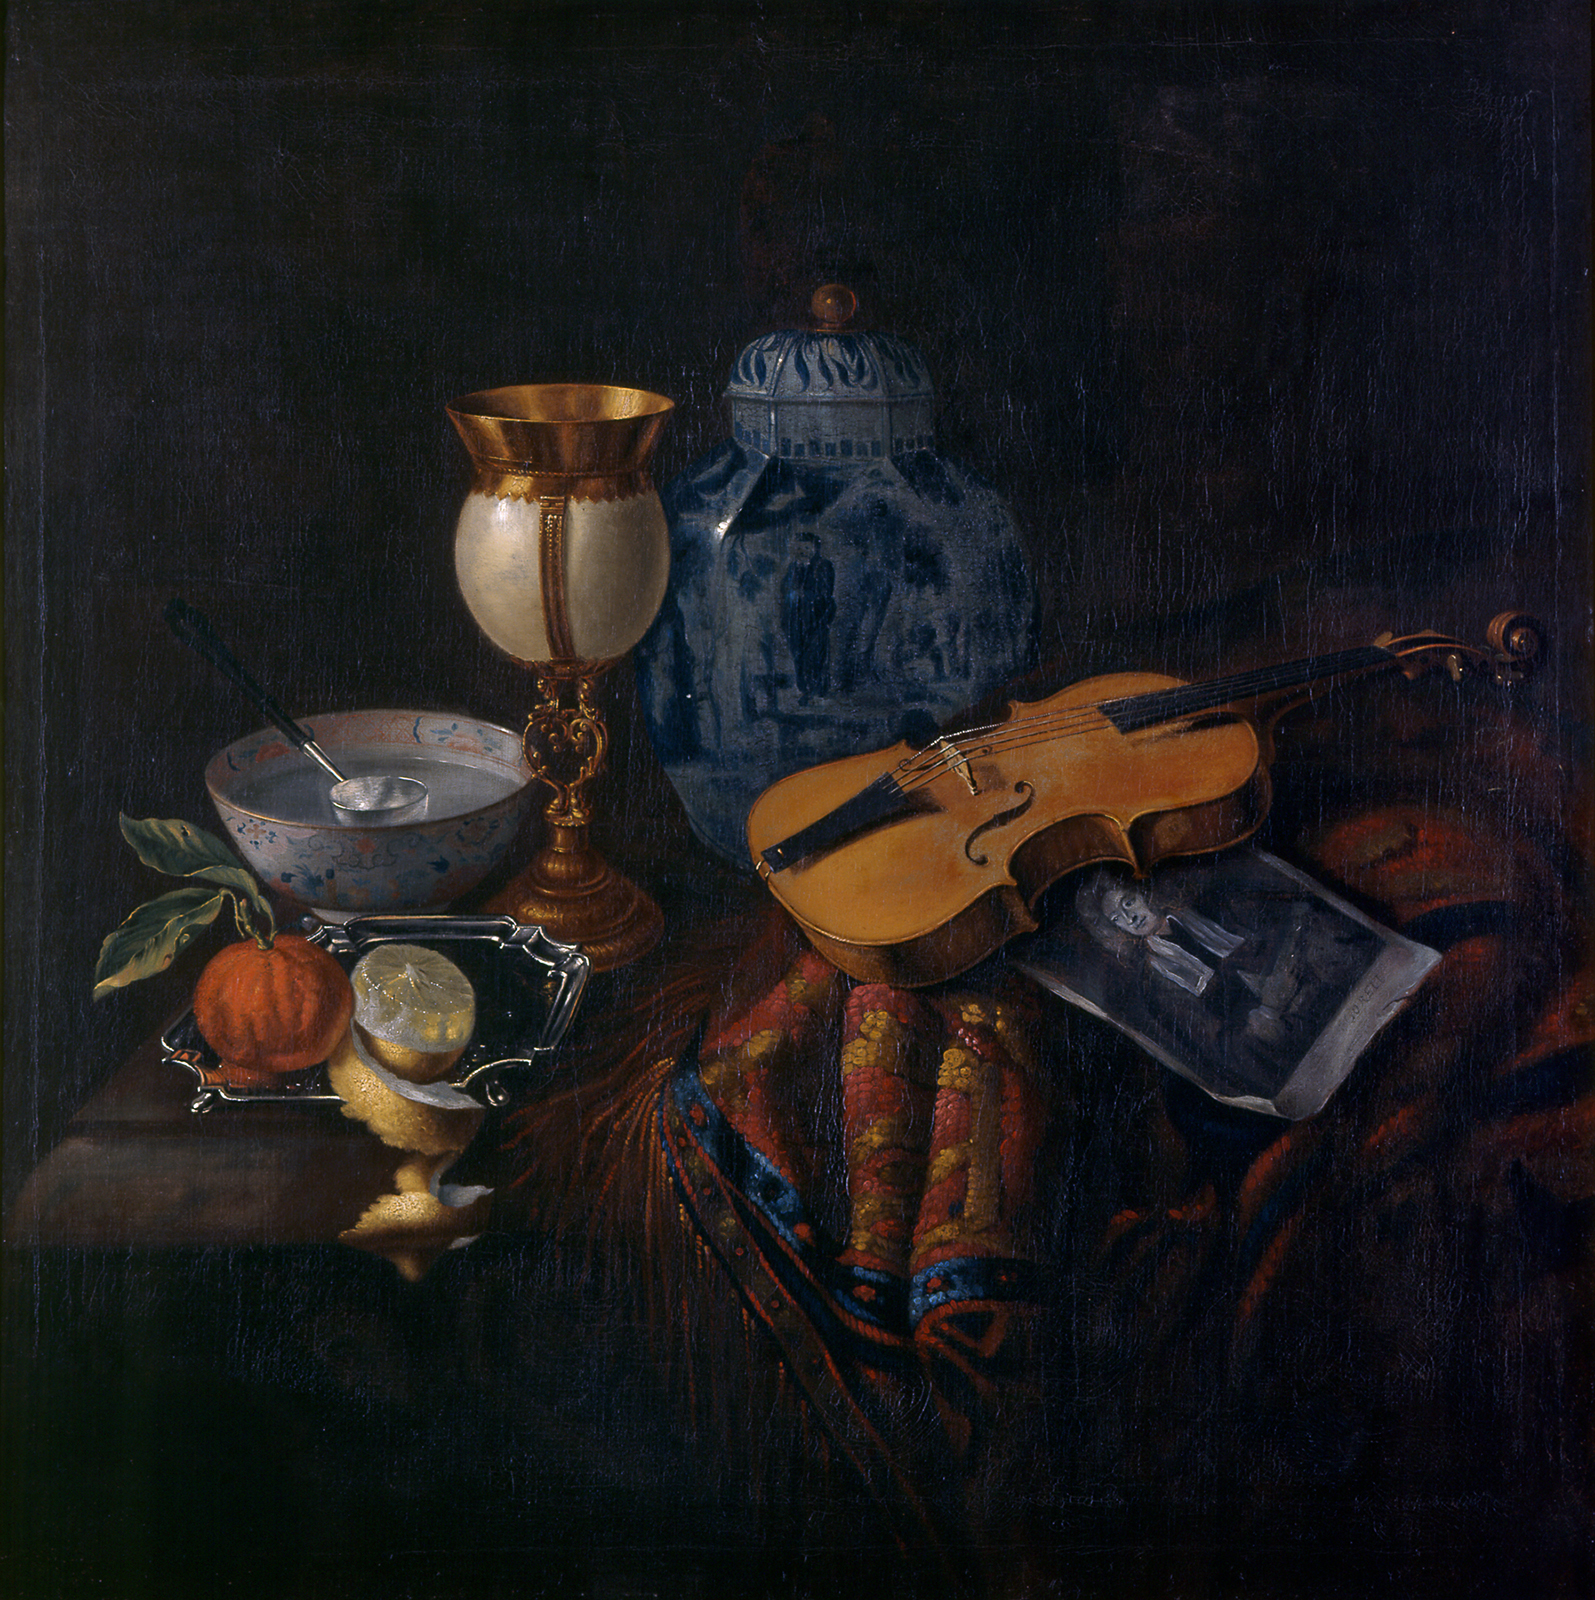 Items arranged on a table include a peeled lemon and an orange, a bowl of water, a gold-and-white goblet, a blue-and-white urn, a violin, and a portrait of a white man wearing a wig